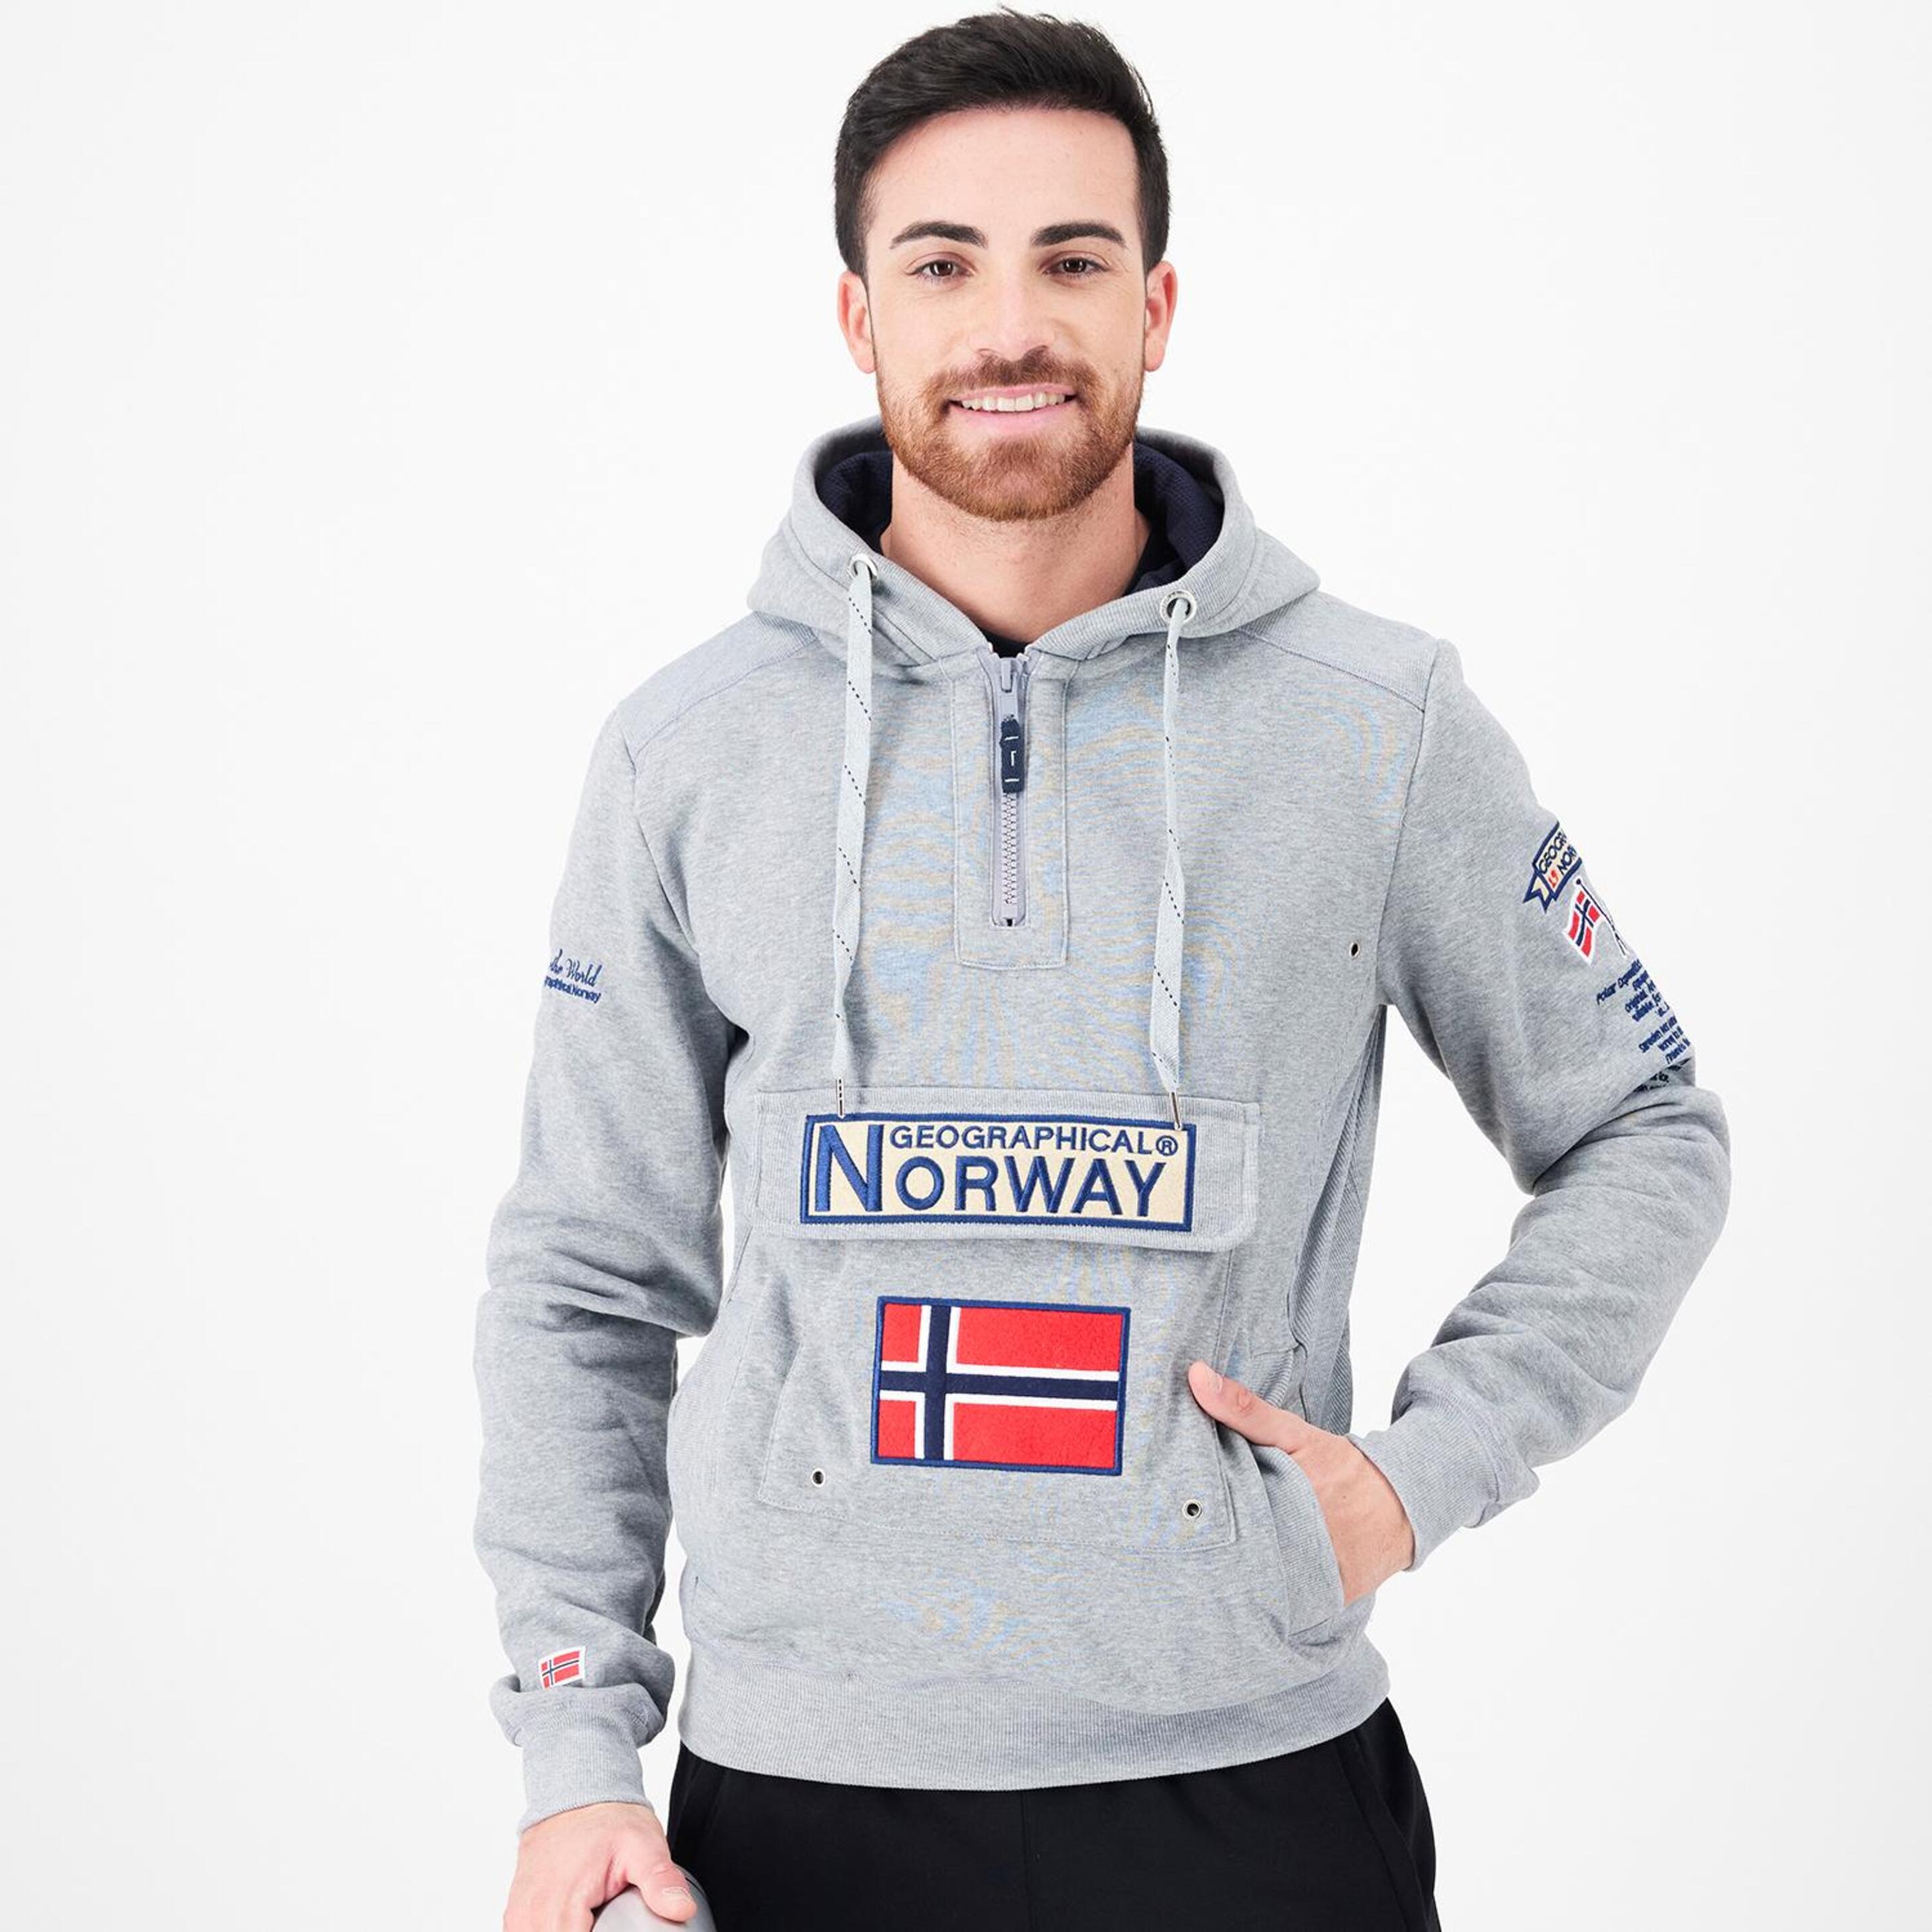 Geographical Norway Gymclass - gris - Sudadera Capucha Hombre